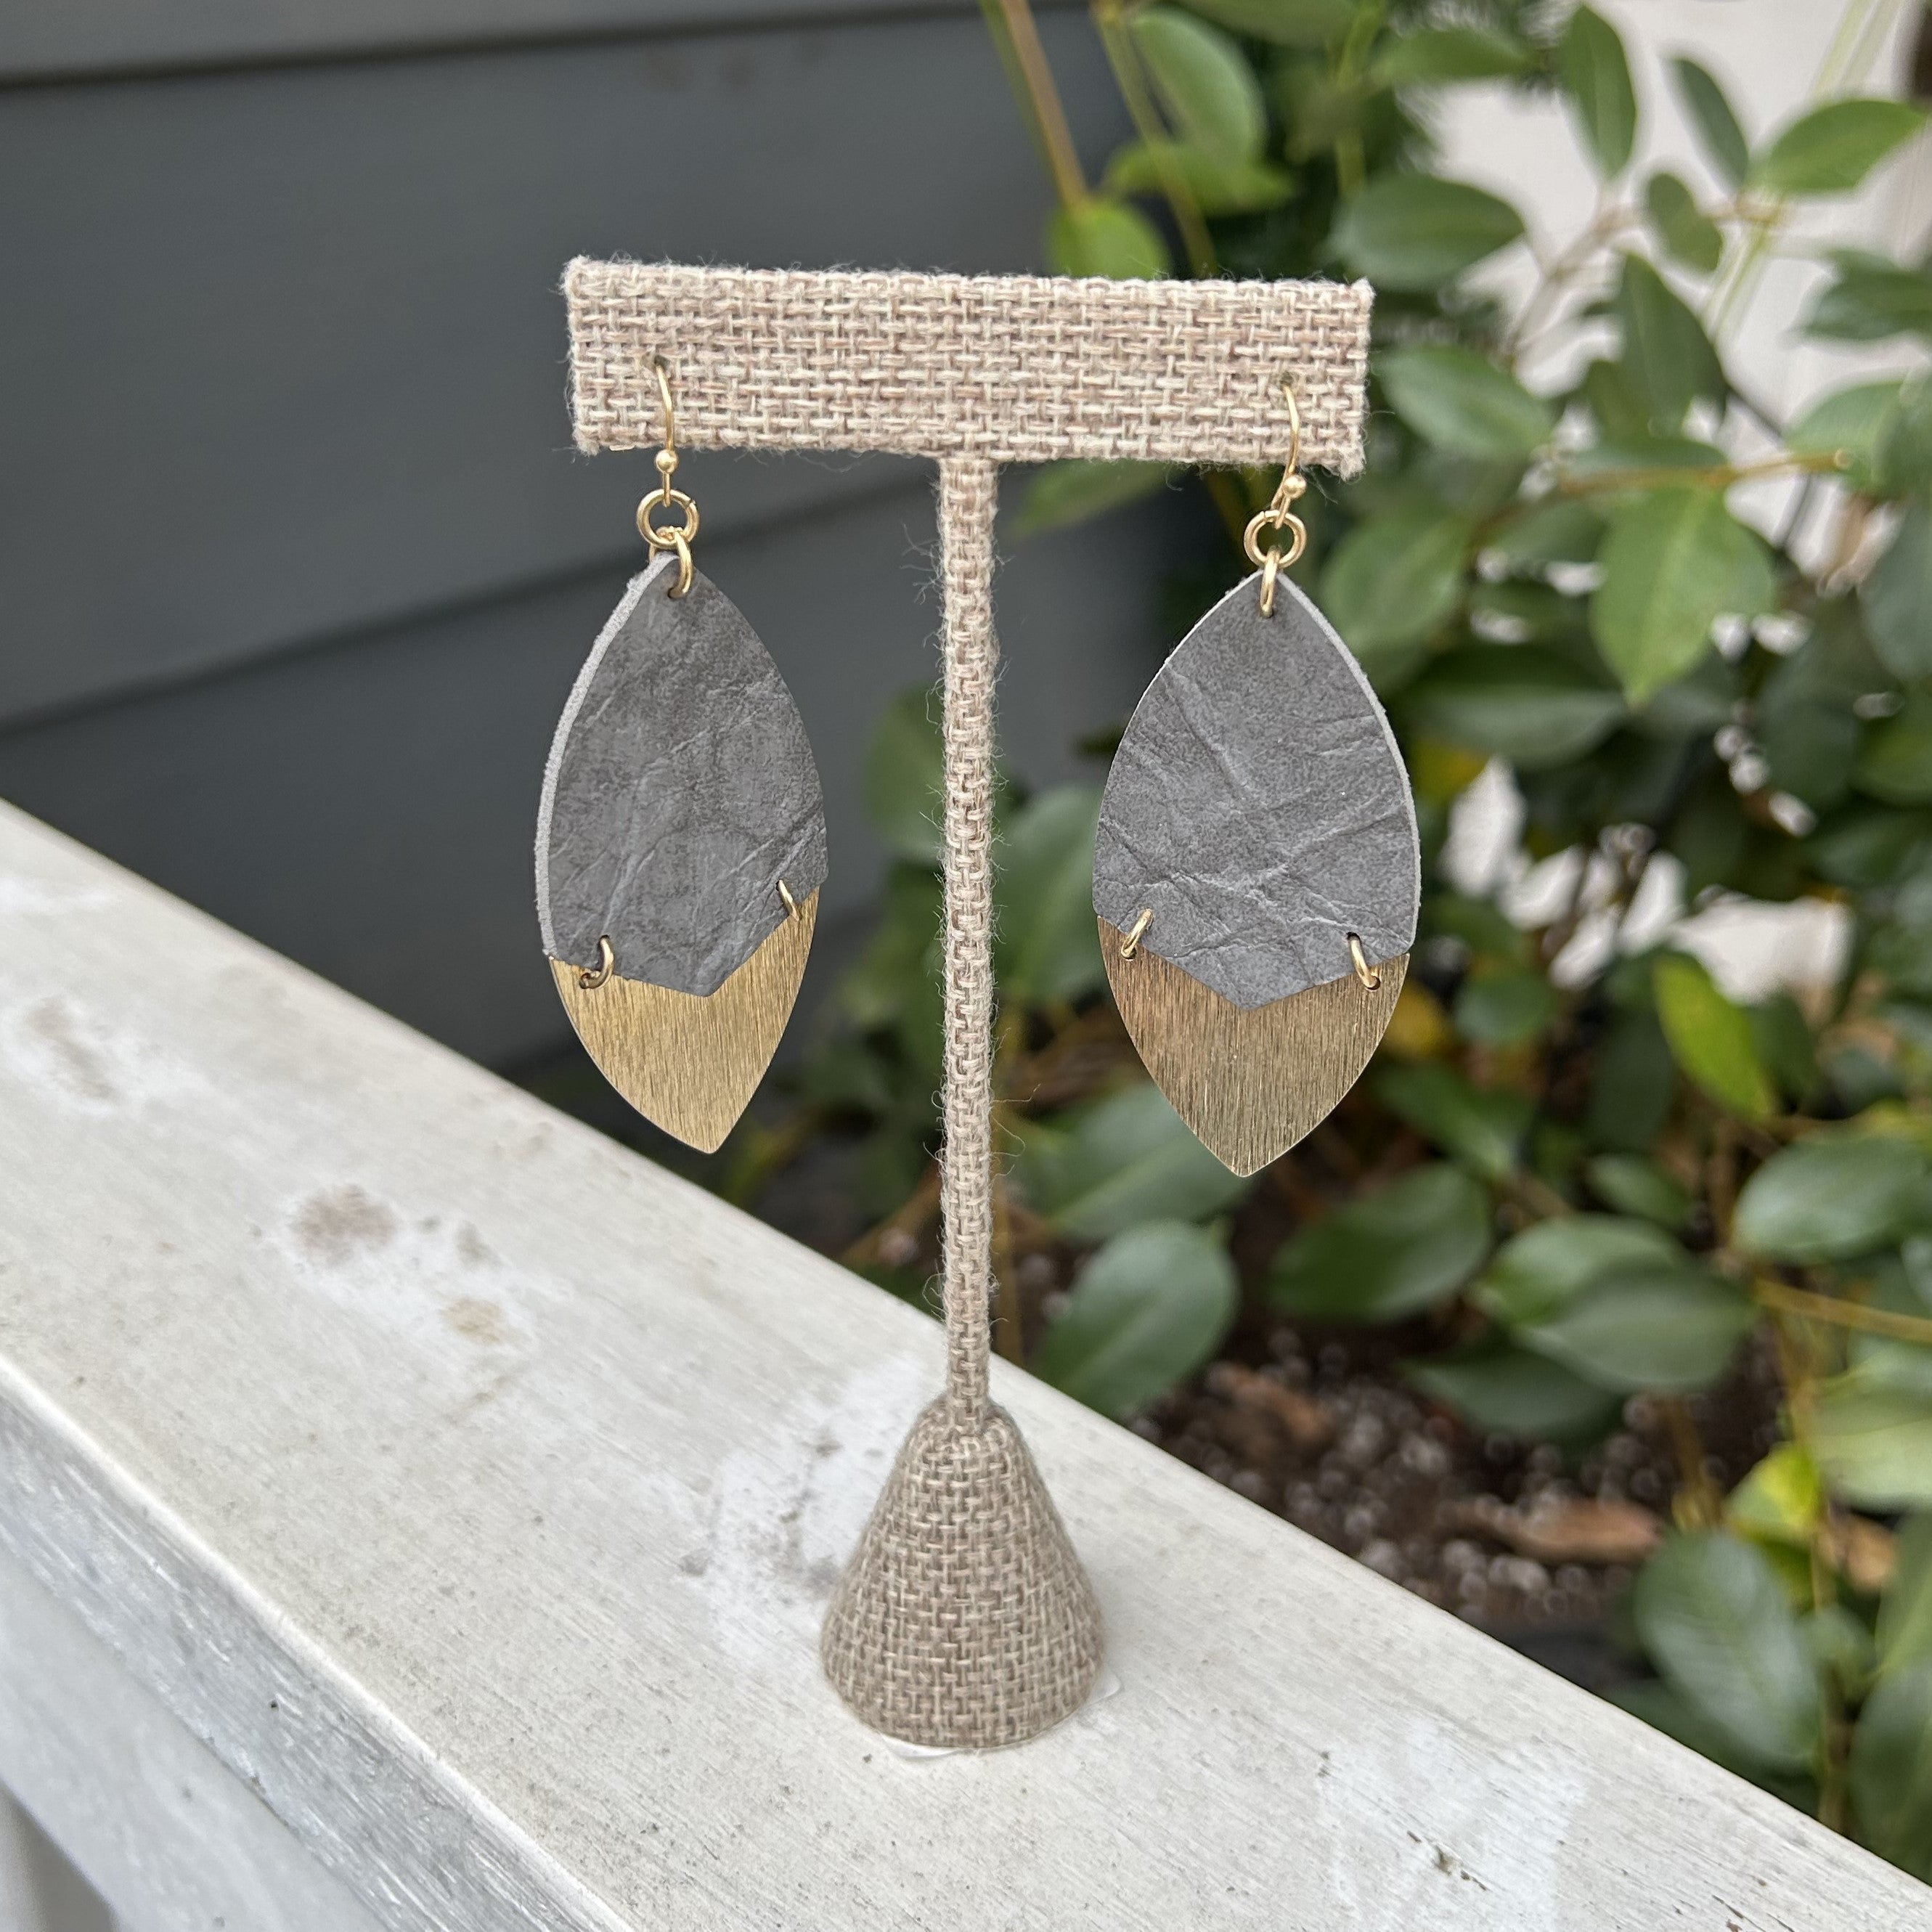 Add a touch of nature to your style with these Leaf Shaped Earrings. The top is a muted gray, while the bottom has a silver sheen, creating a beautiful combination. Add a little uniqueness to your day with these stunning earrings!